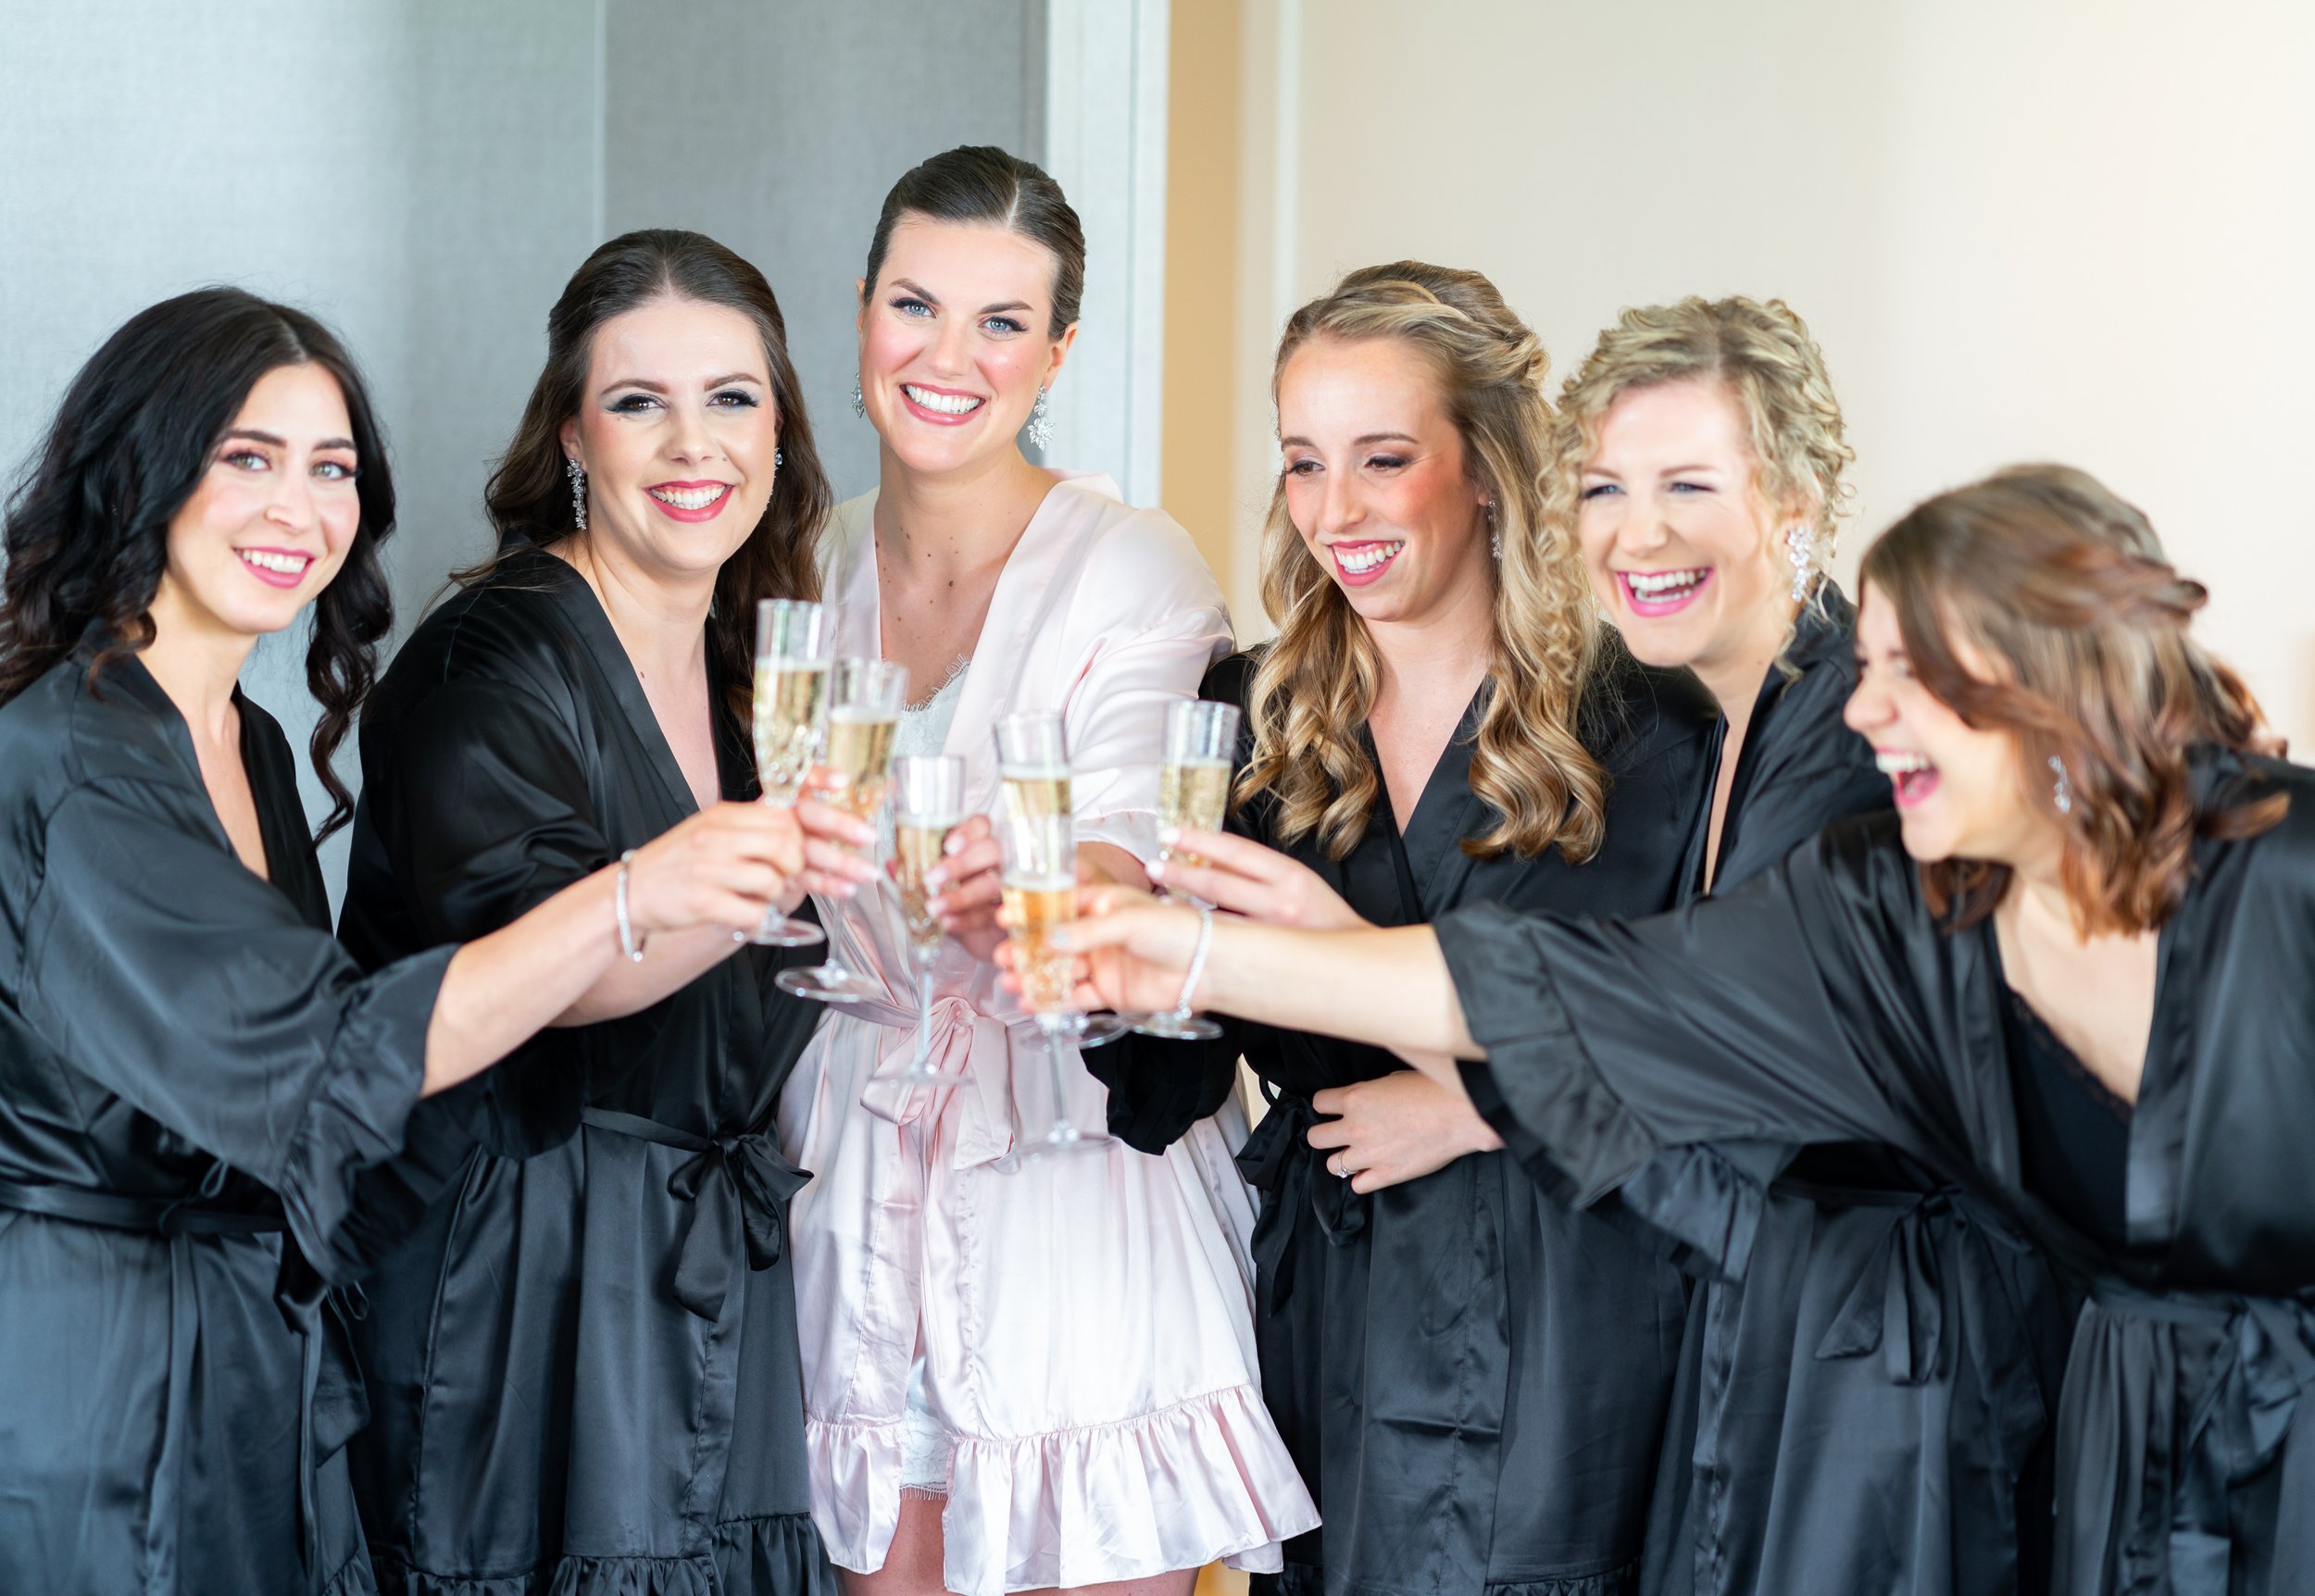 Bride and bridesmaids in matching robes toasting champagne